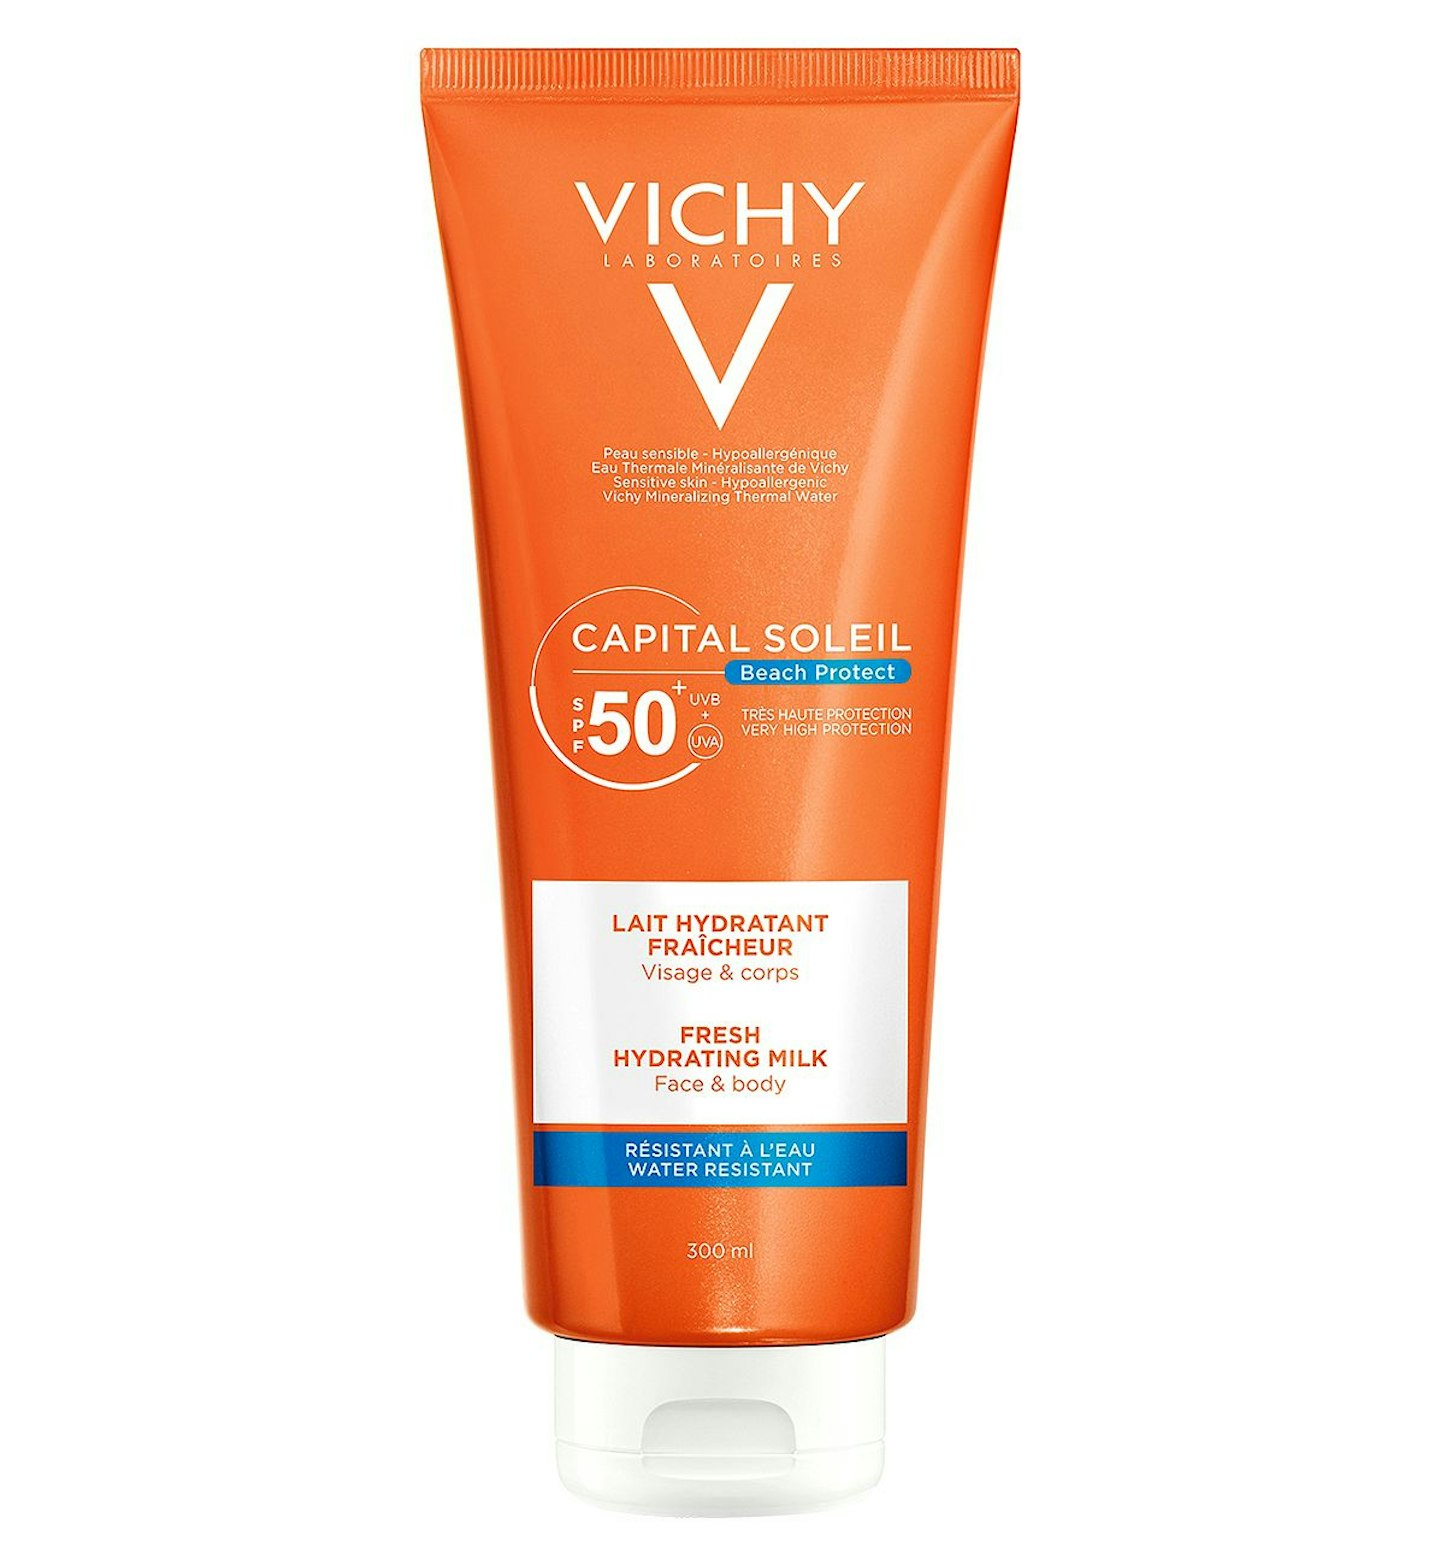 Vichy Ideal Soleil Face & Body Sun Protection Milk SPF50, £14.25 from Boots